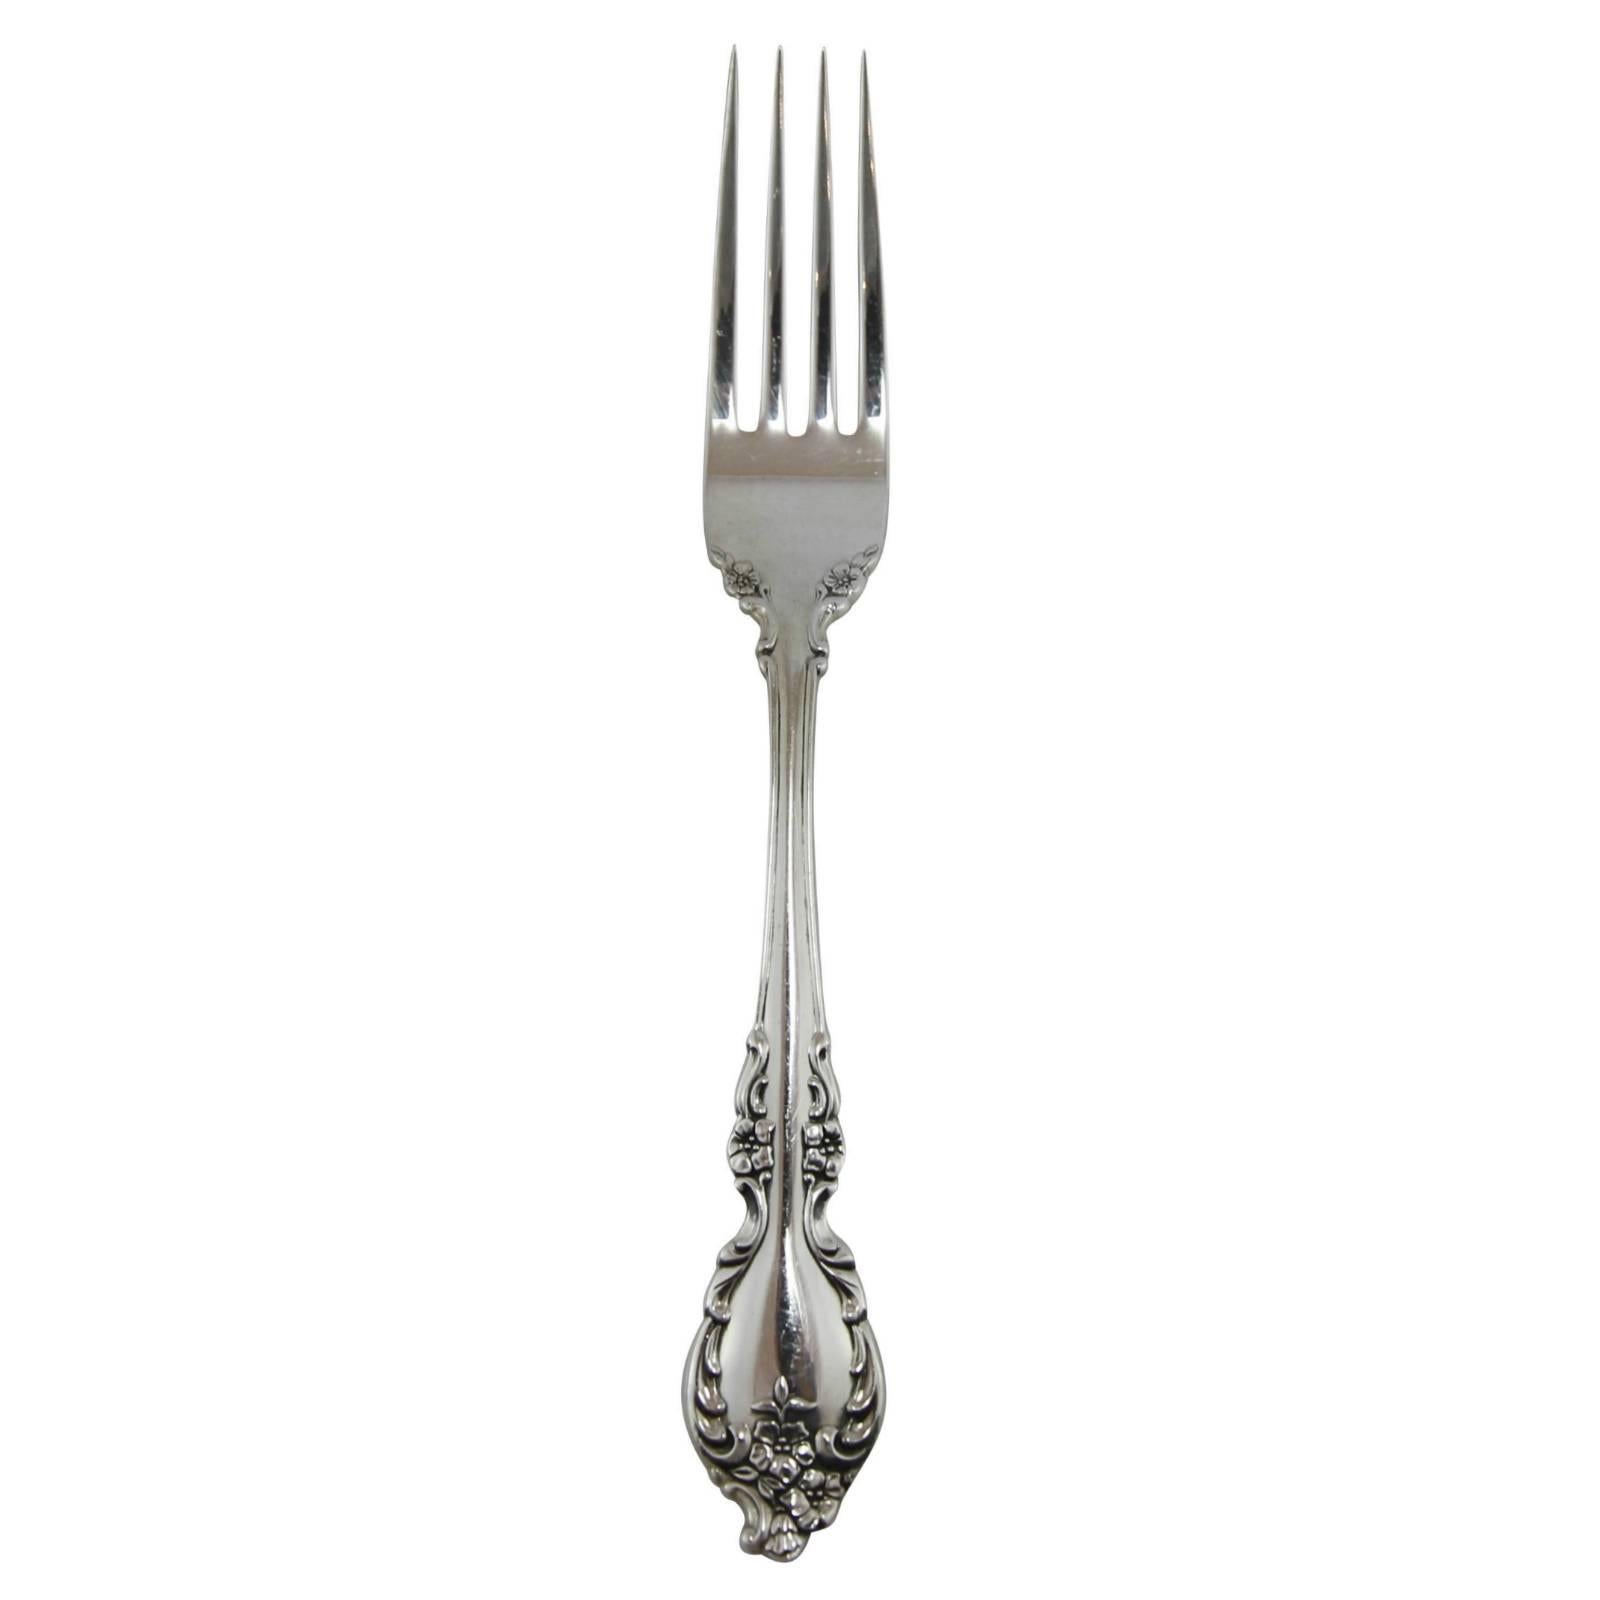 Sterling silver flatware set by Oneida, in the ‘Botticelli’ pattern, as designed by Frank R. Perry. A relatively recent pattern by Oneida, Botticelli is a decorative pattern featuring flowers and swags, in a distinct European style. With a total of